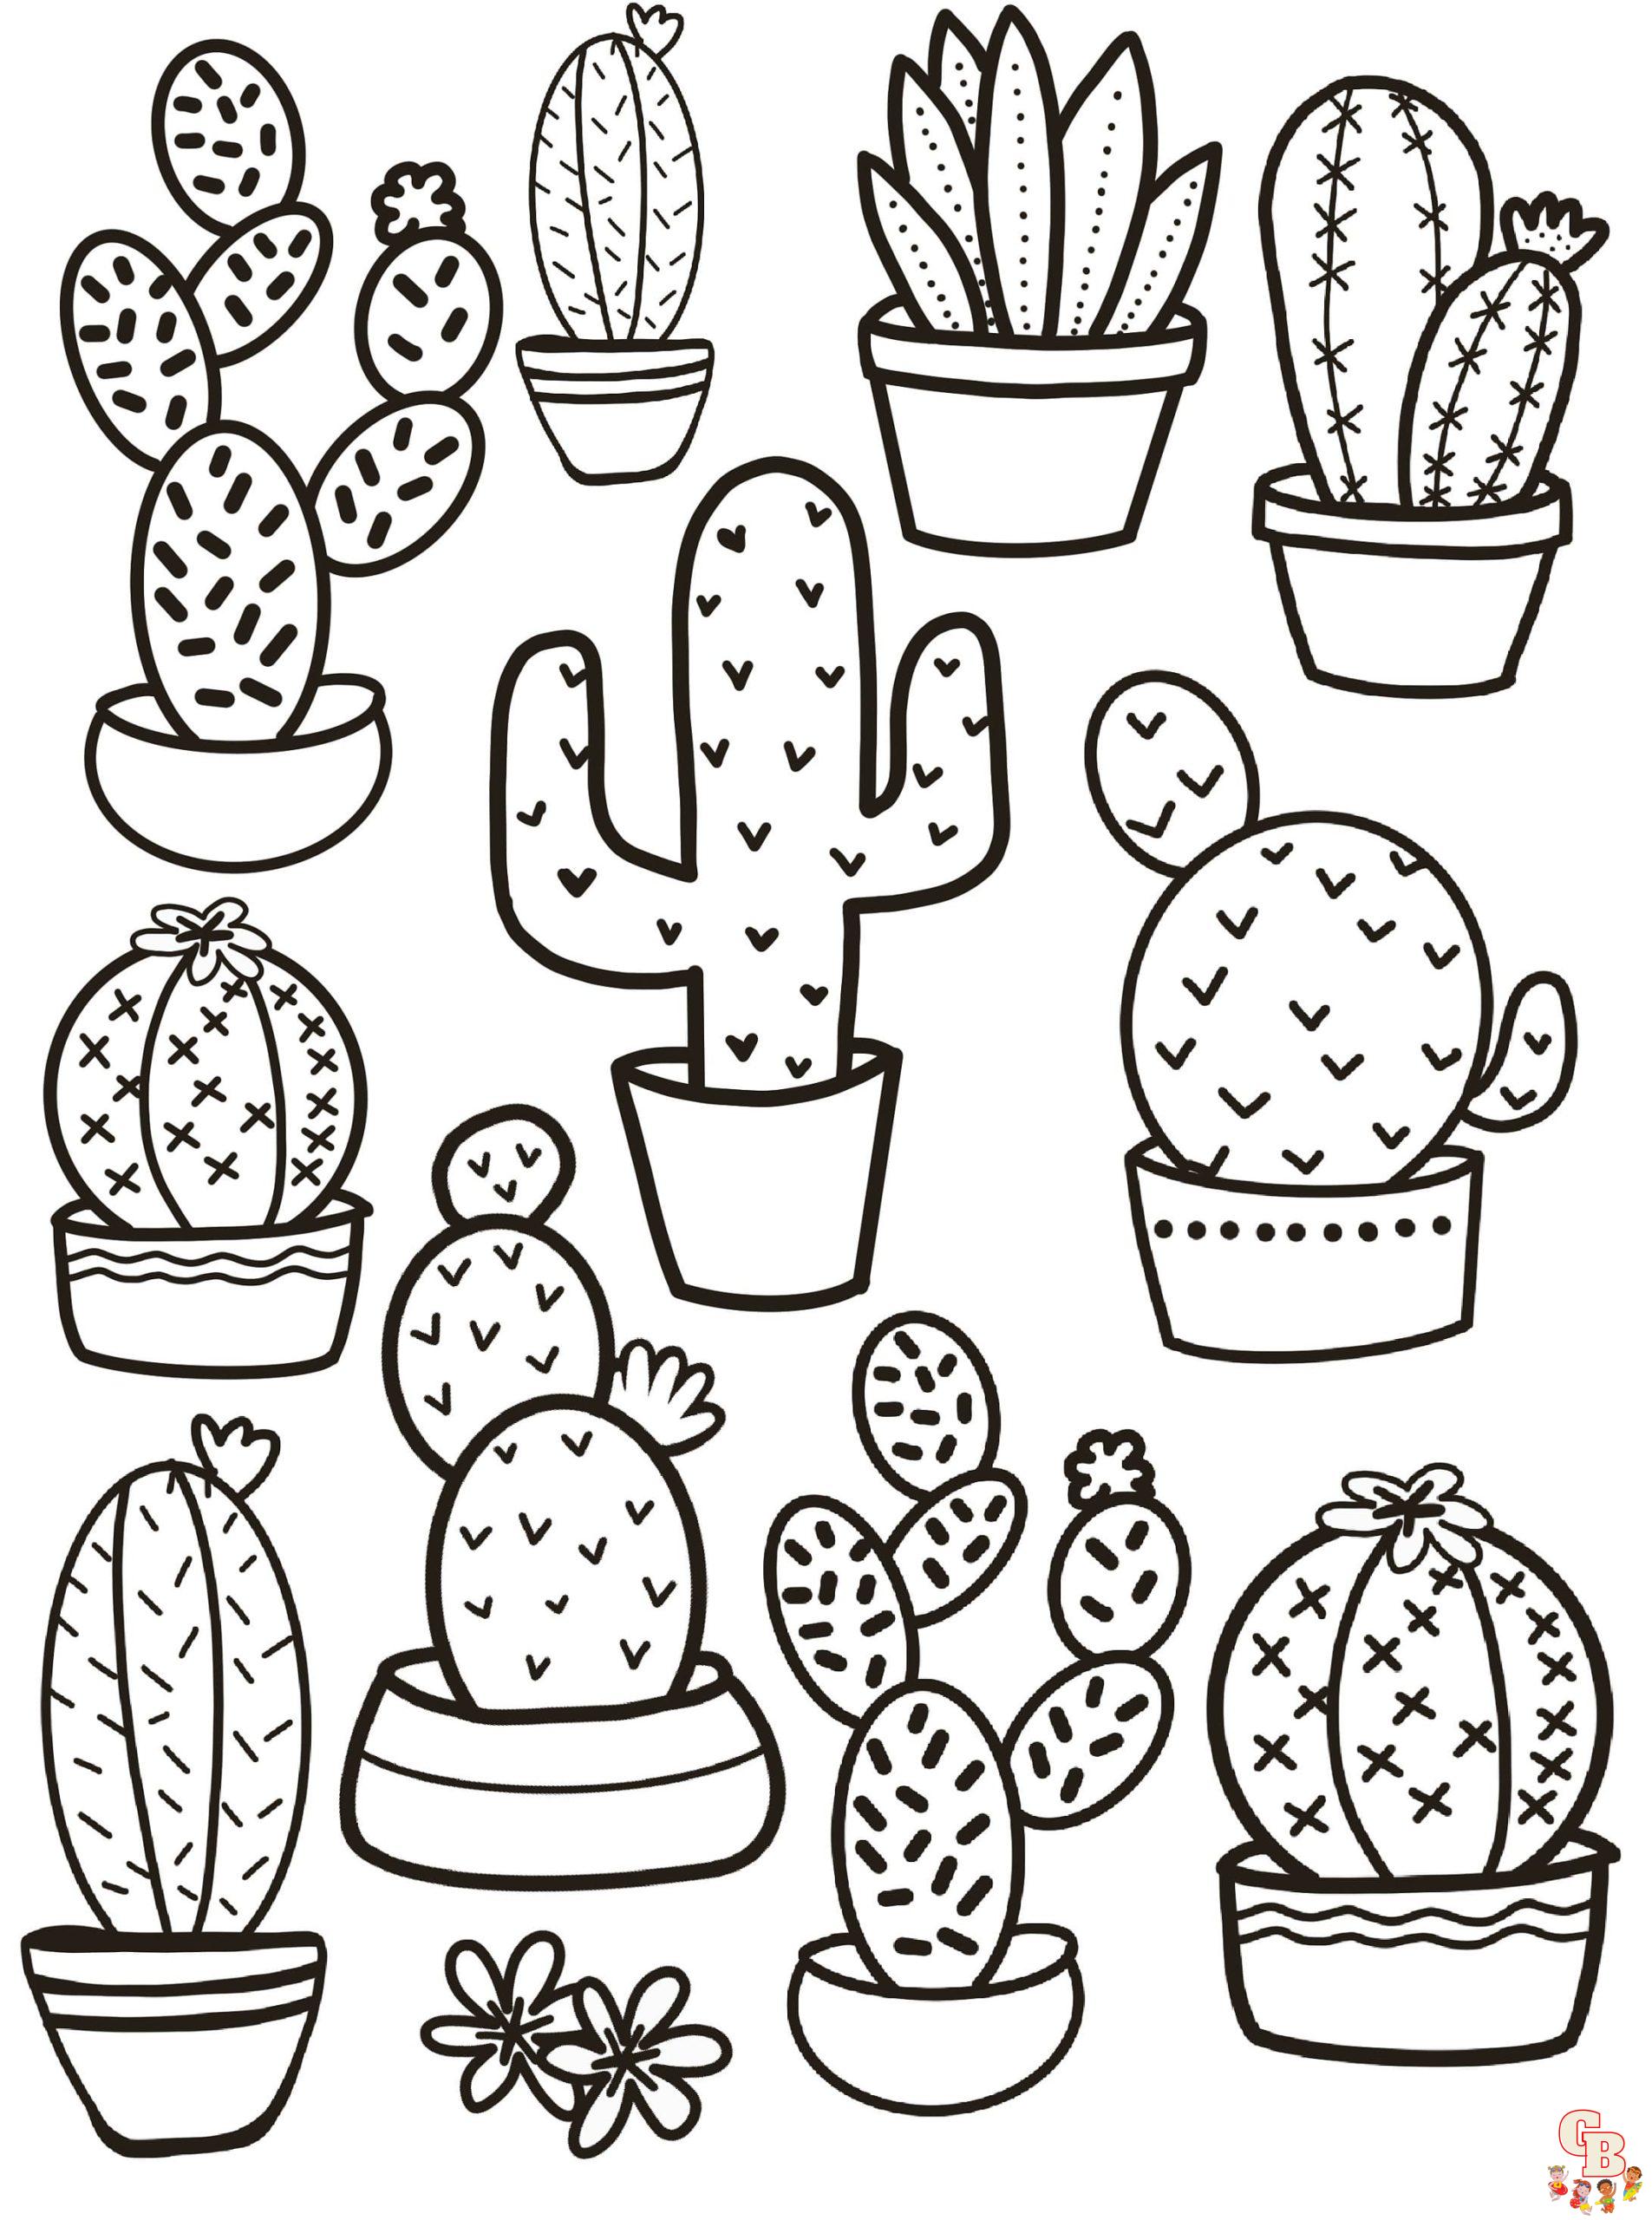 Free cacti coloring pages for kids